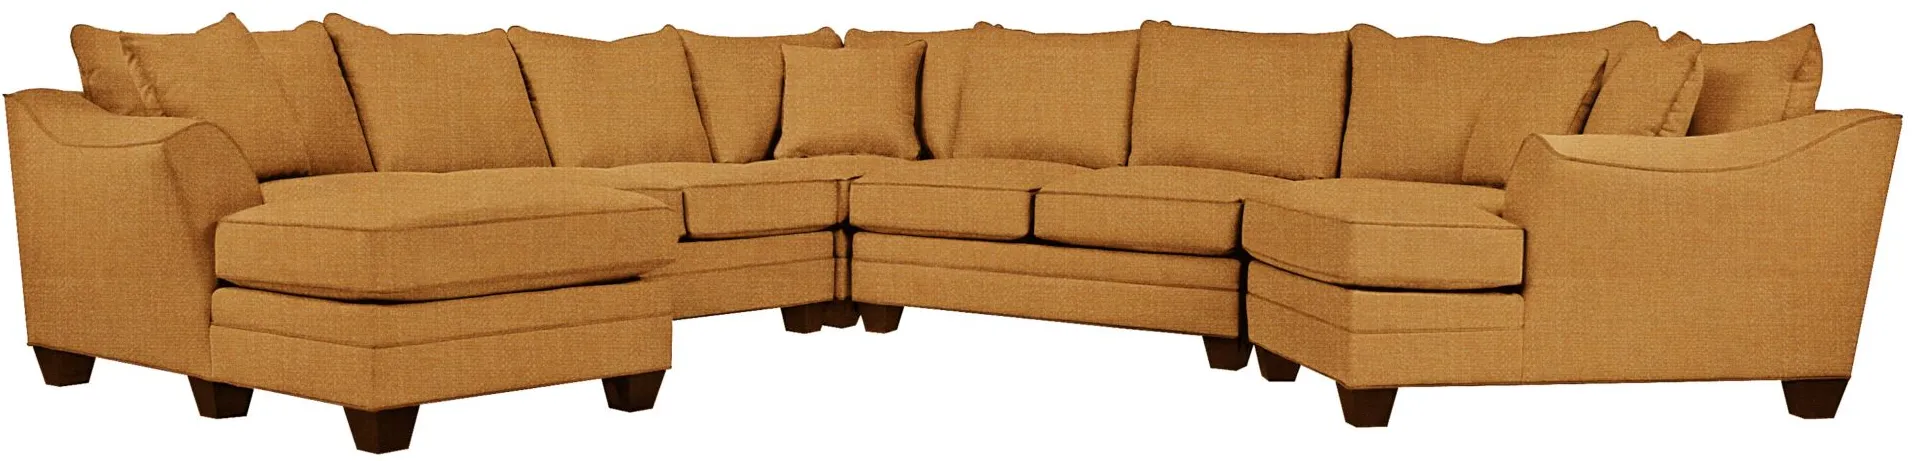 Foresthill 5-pc. Left Hand Facing Sectional Sofa in Elliot Sunflower by H.M. Richards